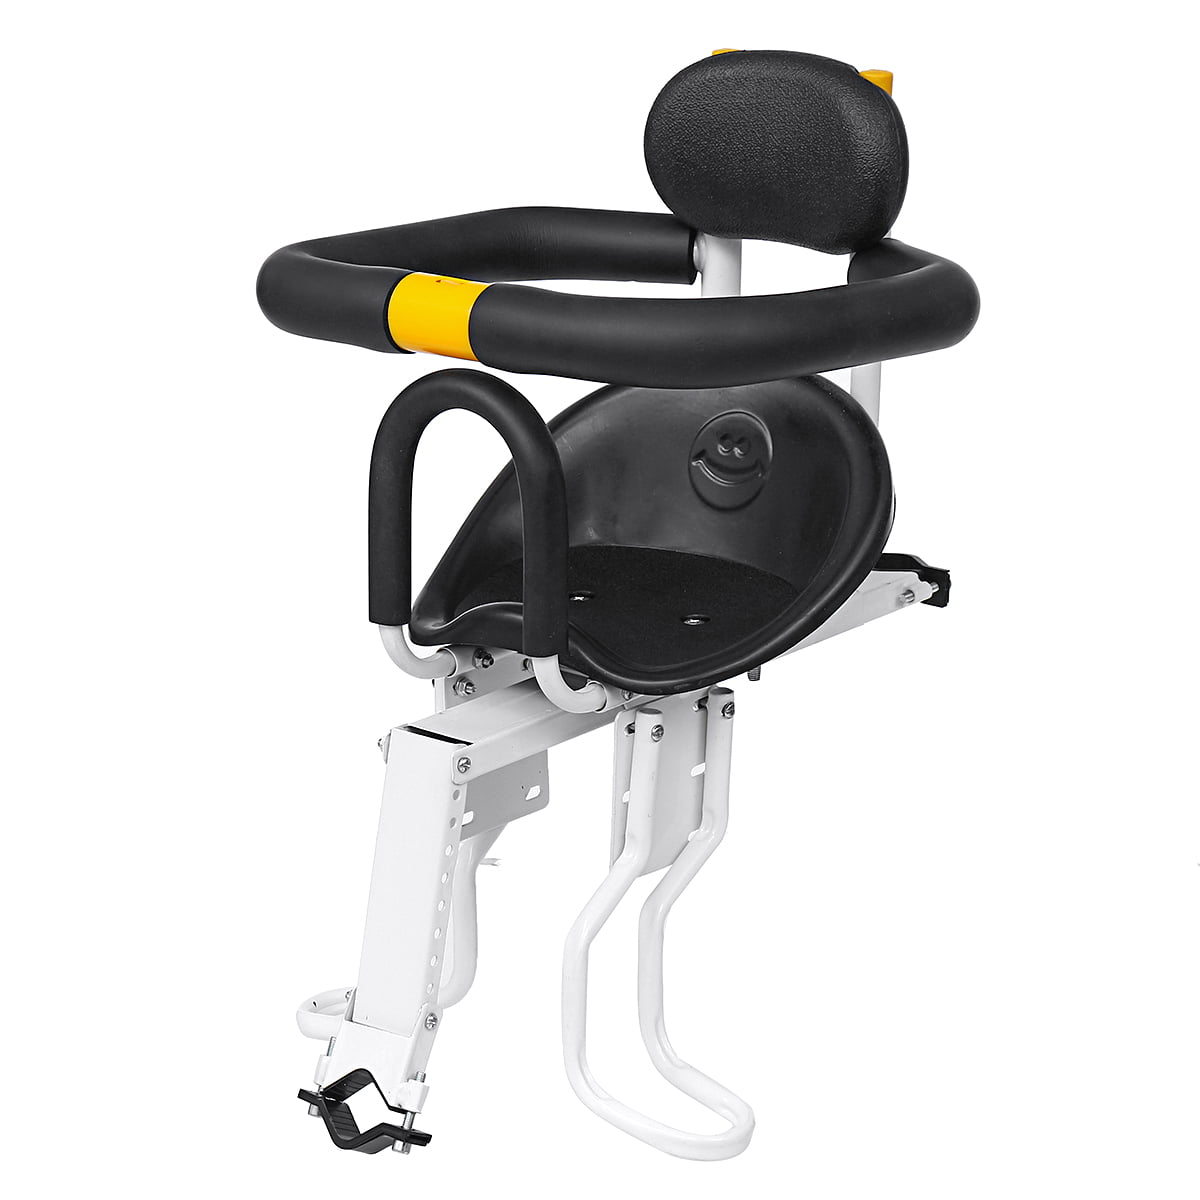 Details about   Kids Baby Child Bicycle Seat Bike Safety Security Chair Carrier Seats Saddle 